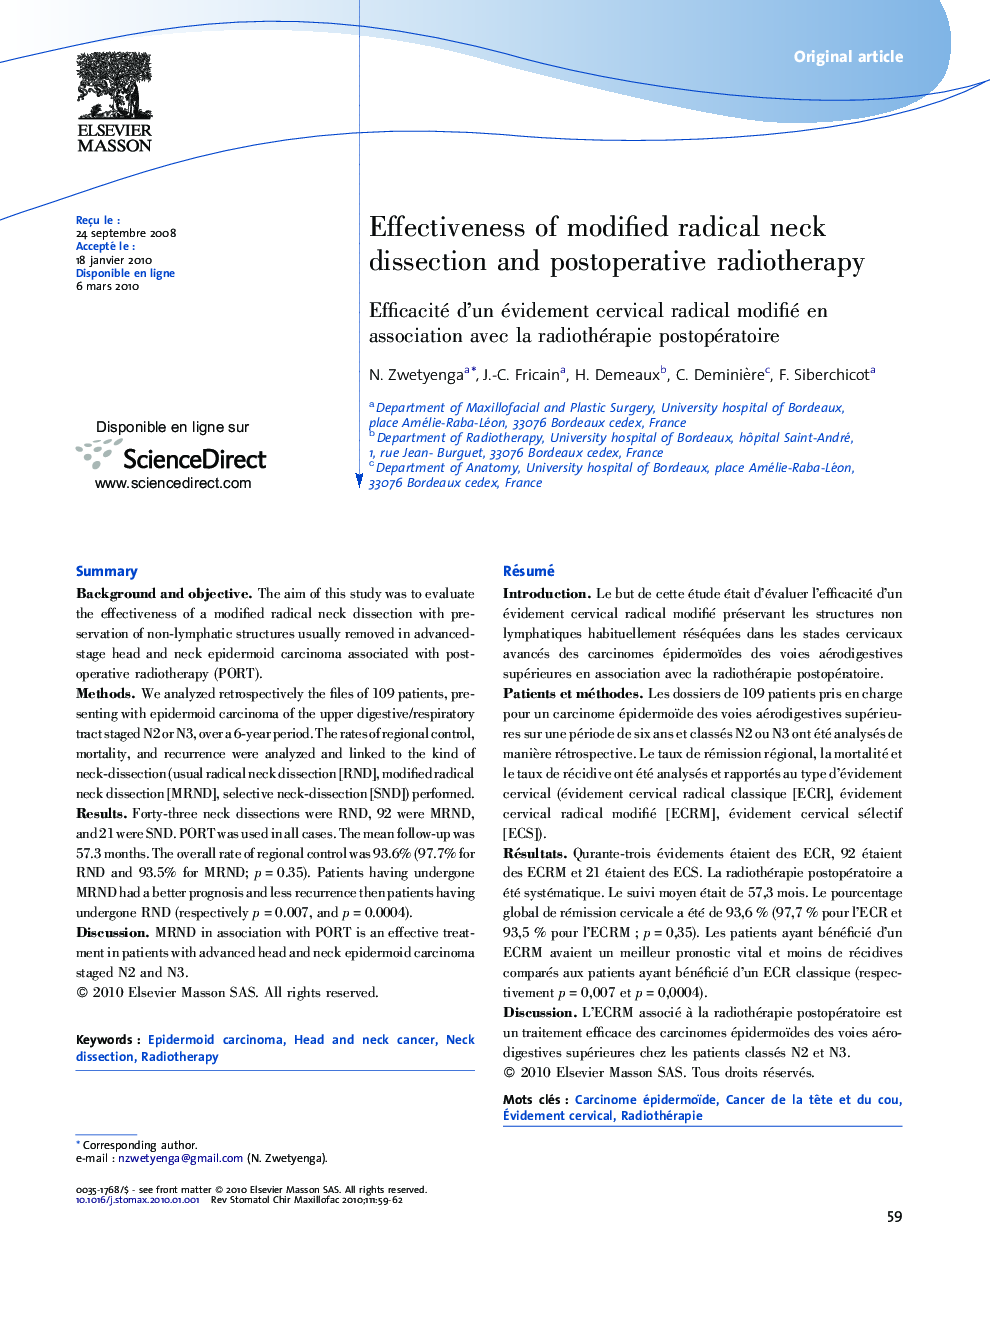 Effectiveness of modified radical neck dissection and postoperative radiotherapy